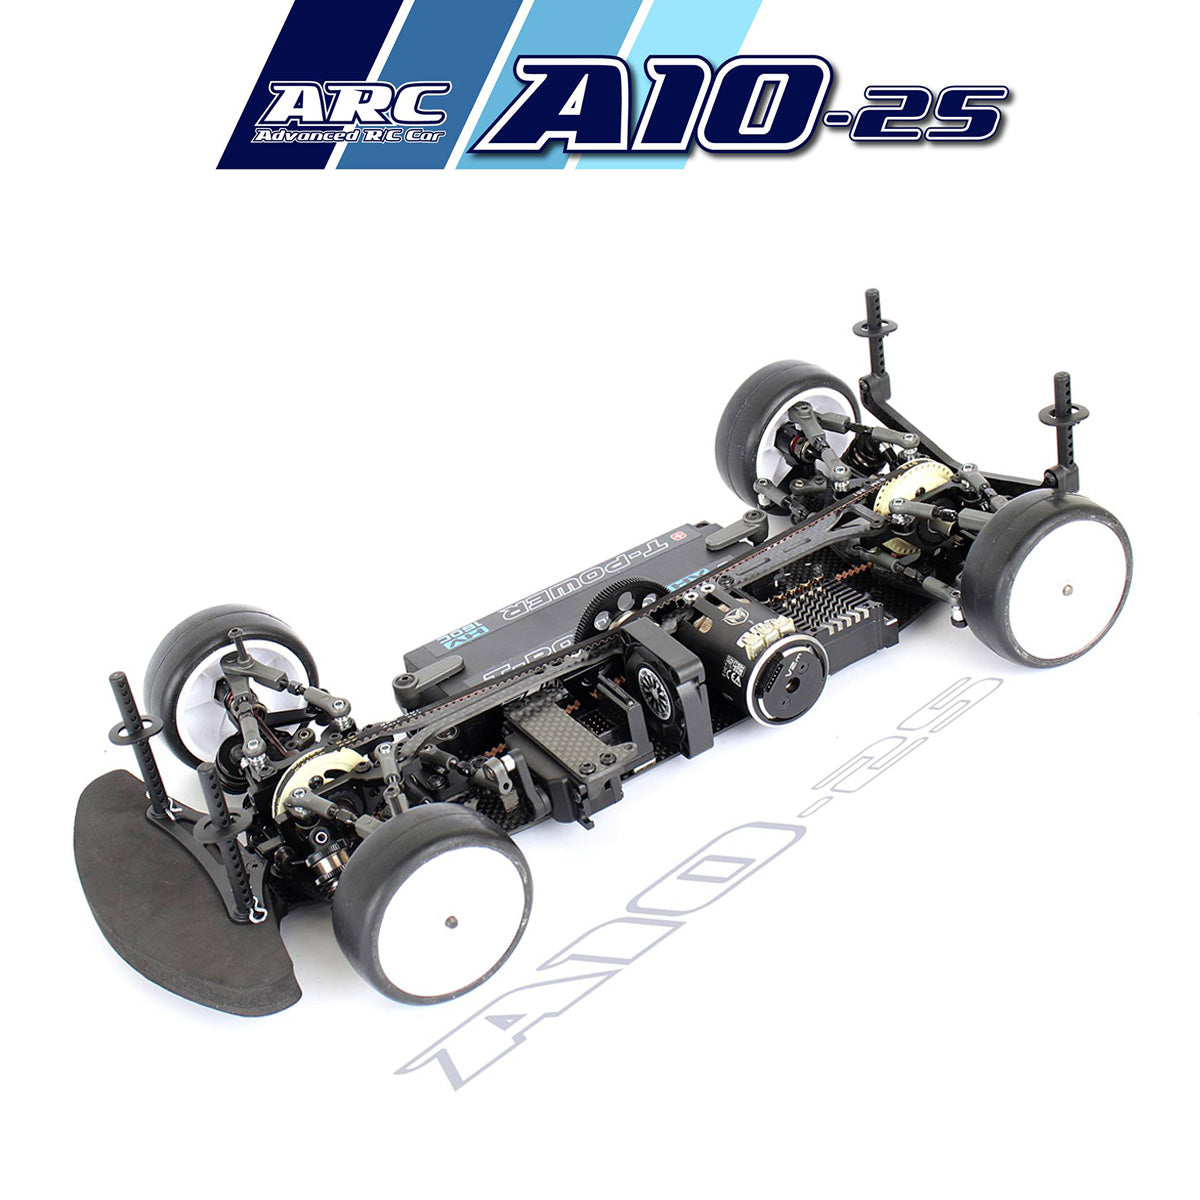 **Pre-order** ARC R100038 A10-25 Electric Touring Car Kit (Carbon Chassis)